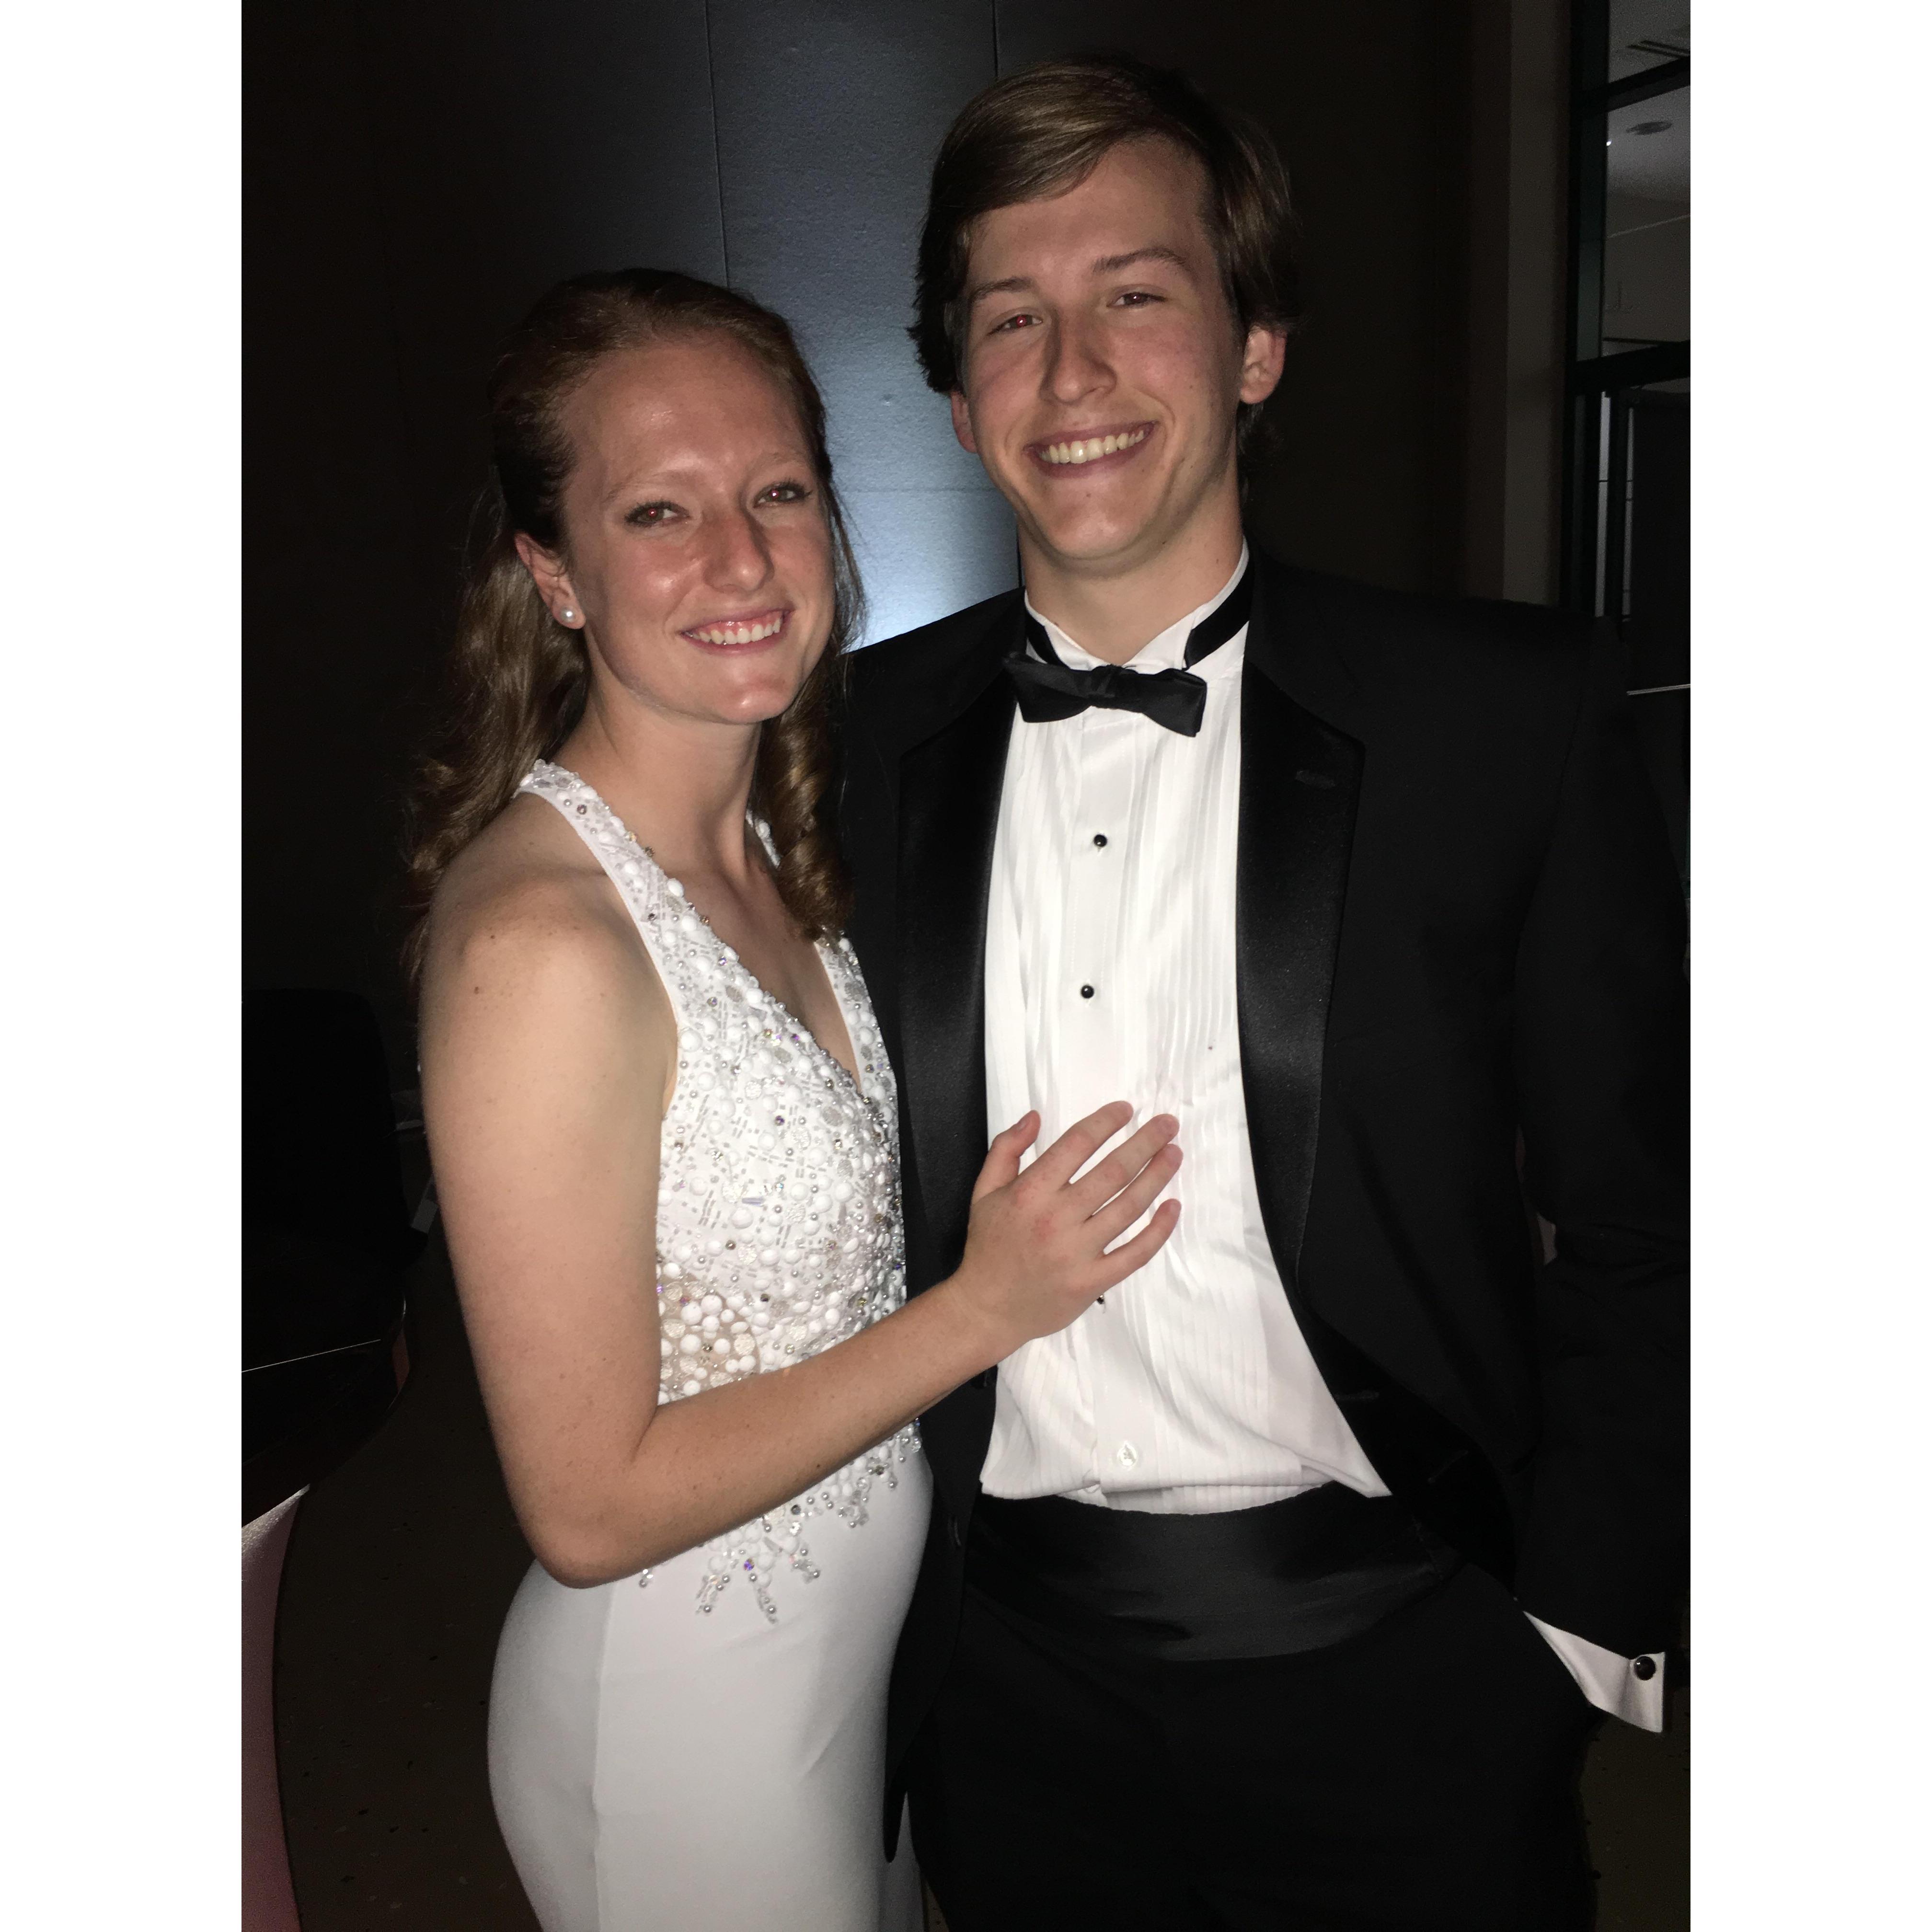 Southern Miss's Annual Gala after Caroline's year as SGA President